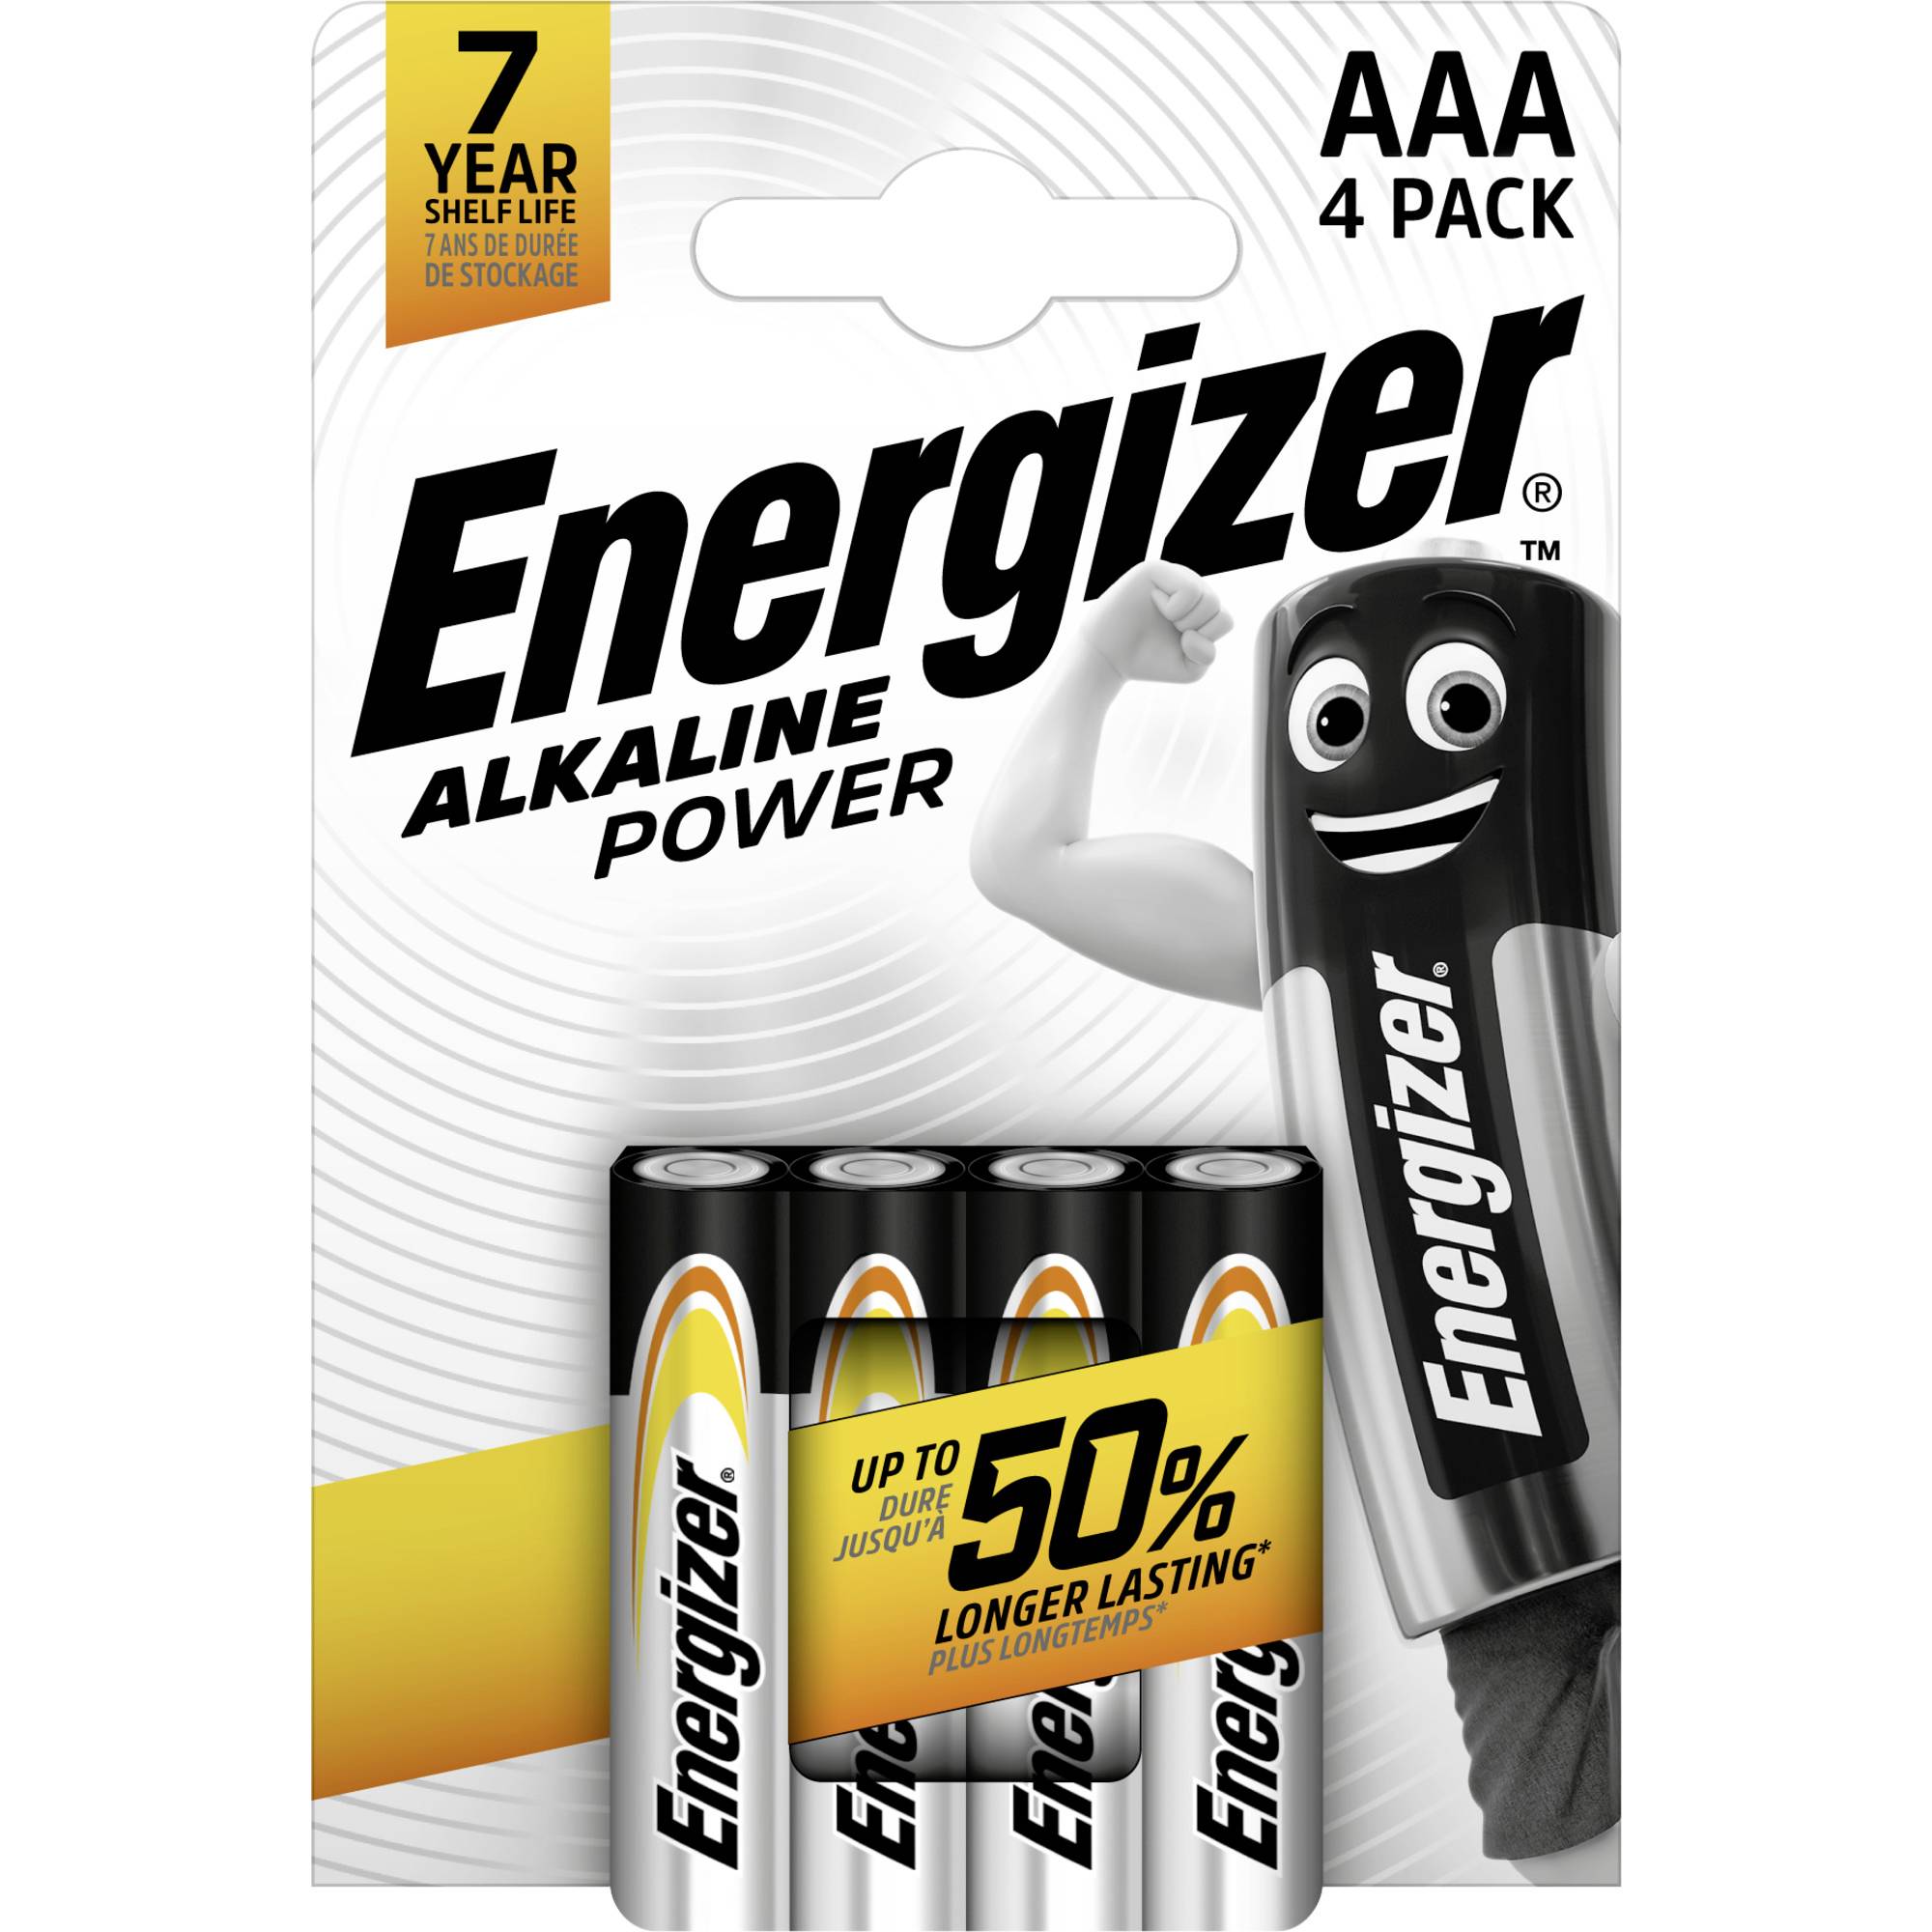 ENERGIZER Power alkaline AAA/LR03 4-blister - Long lasting energy for your everyday devices.PRODUCT